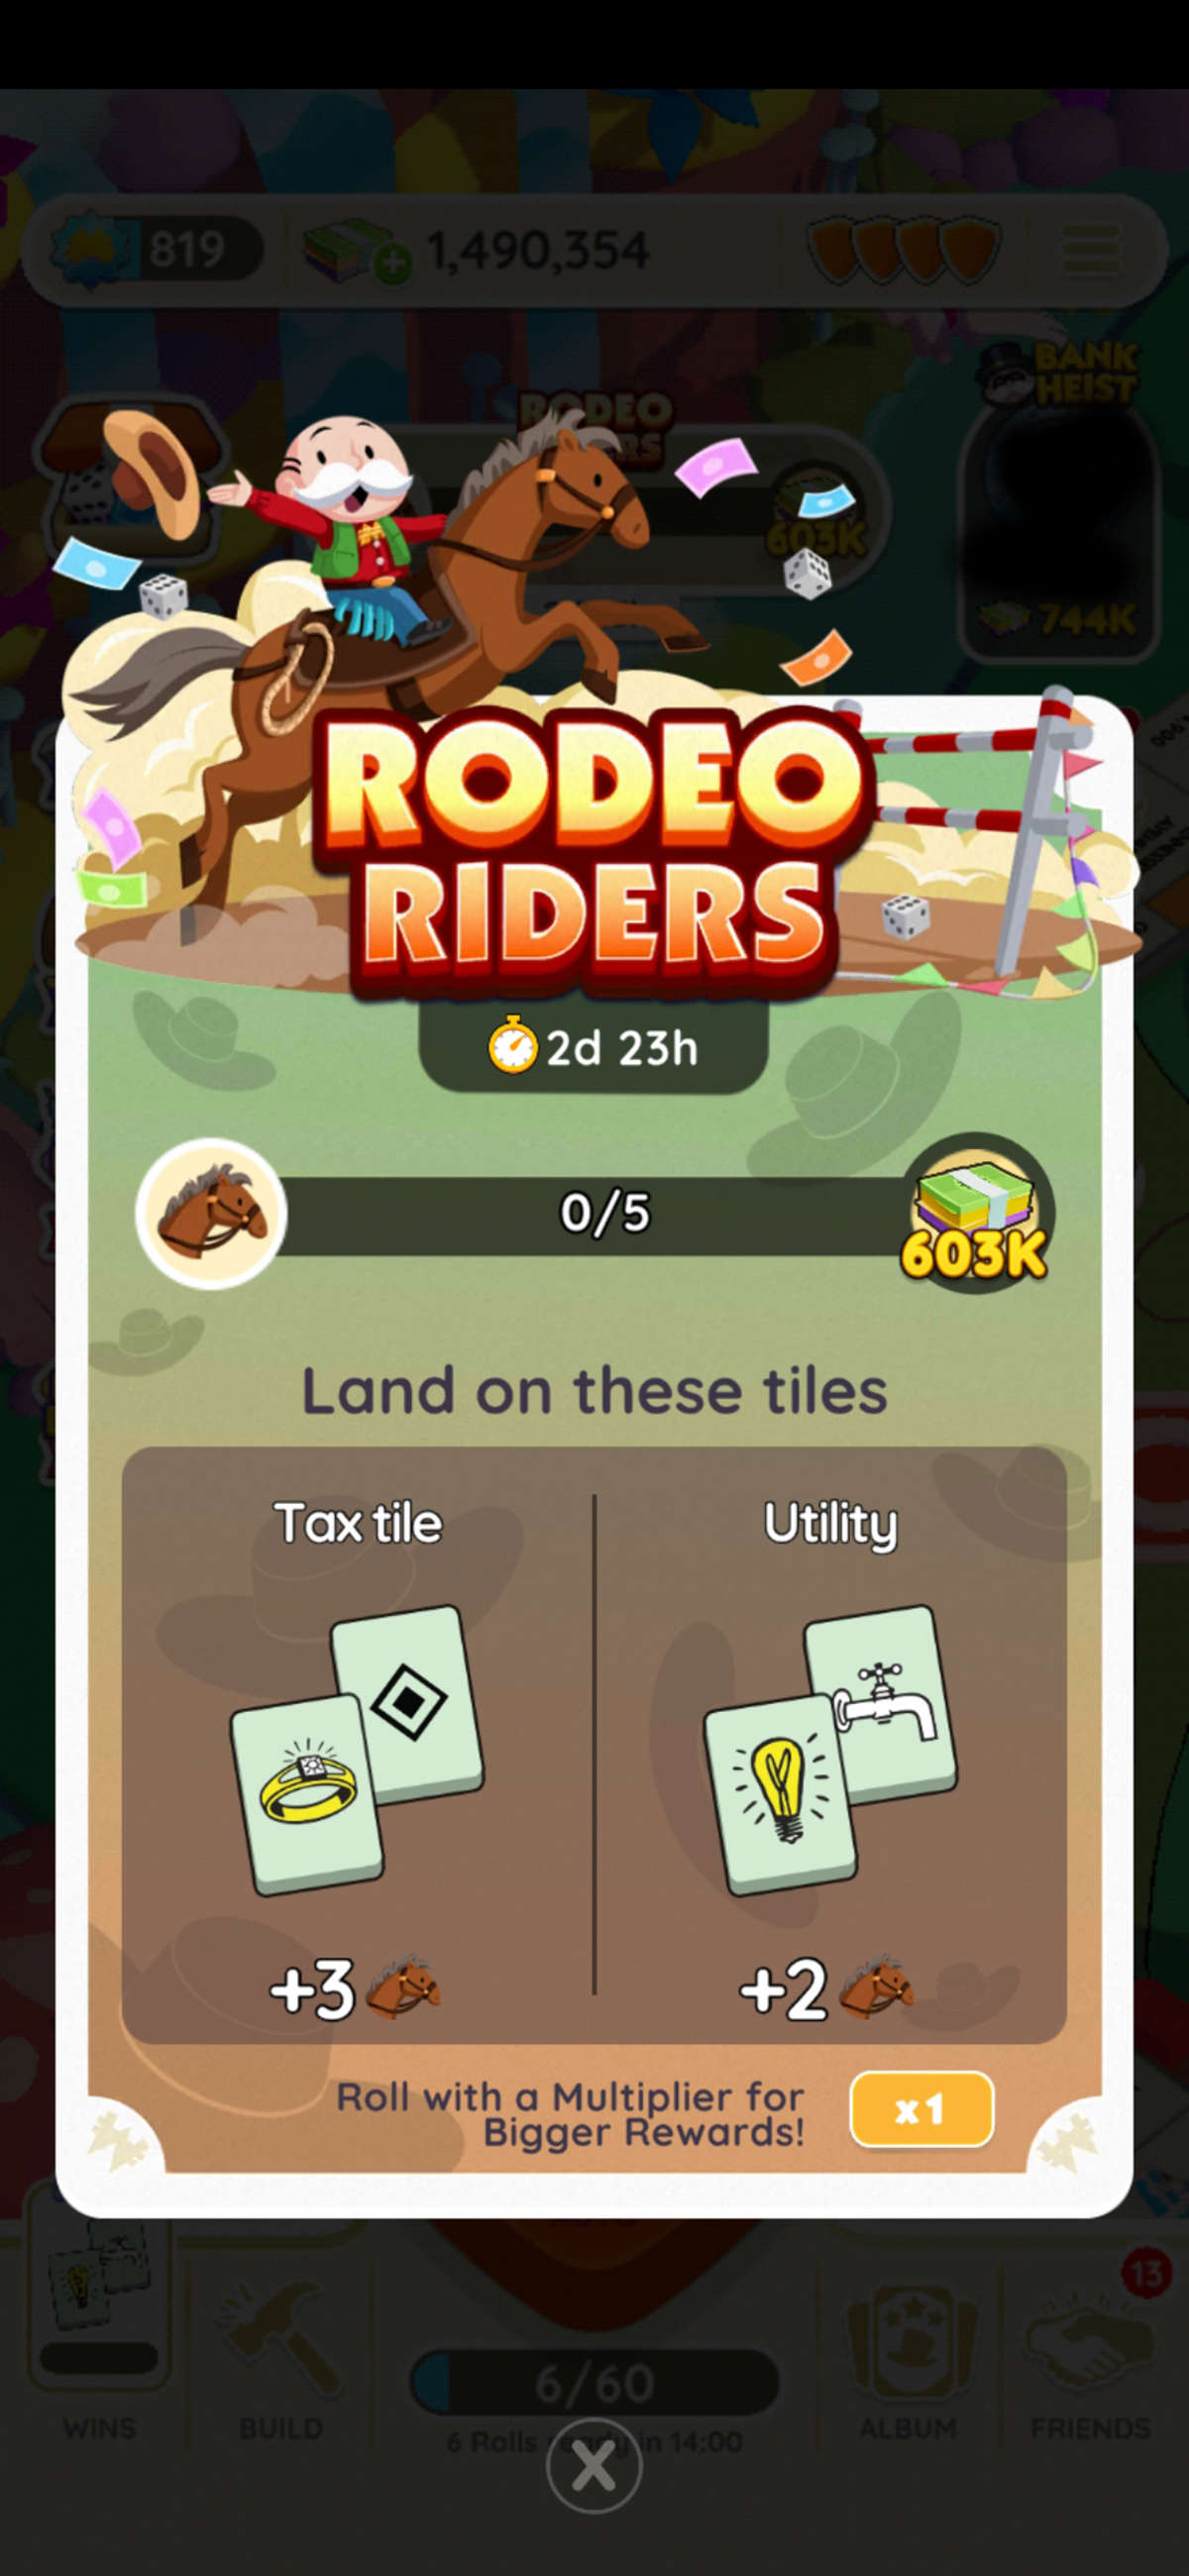 Instructions for the Rodeo Riders event in Monopoly GO as part of a guide on all the rewards for it, how it works, and how to win at it.